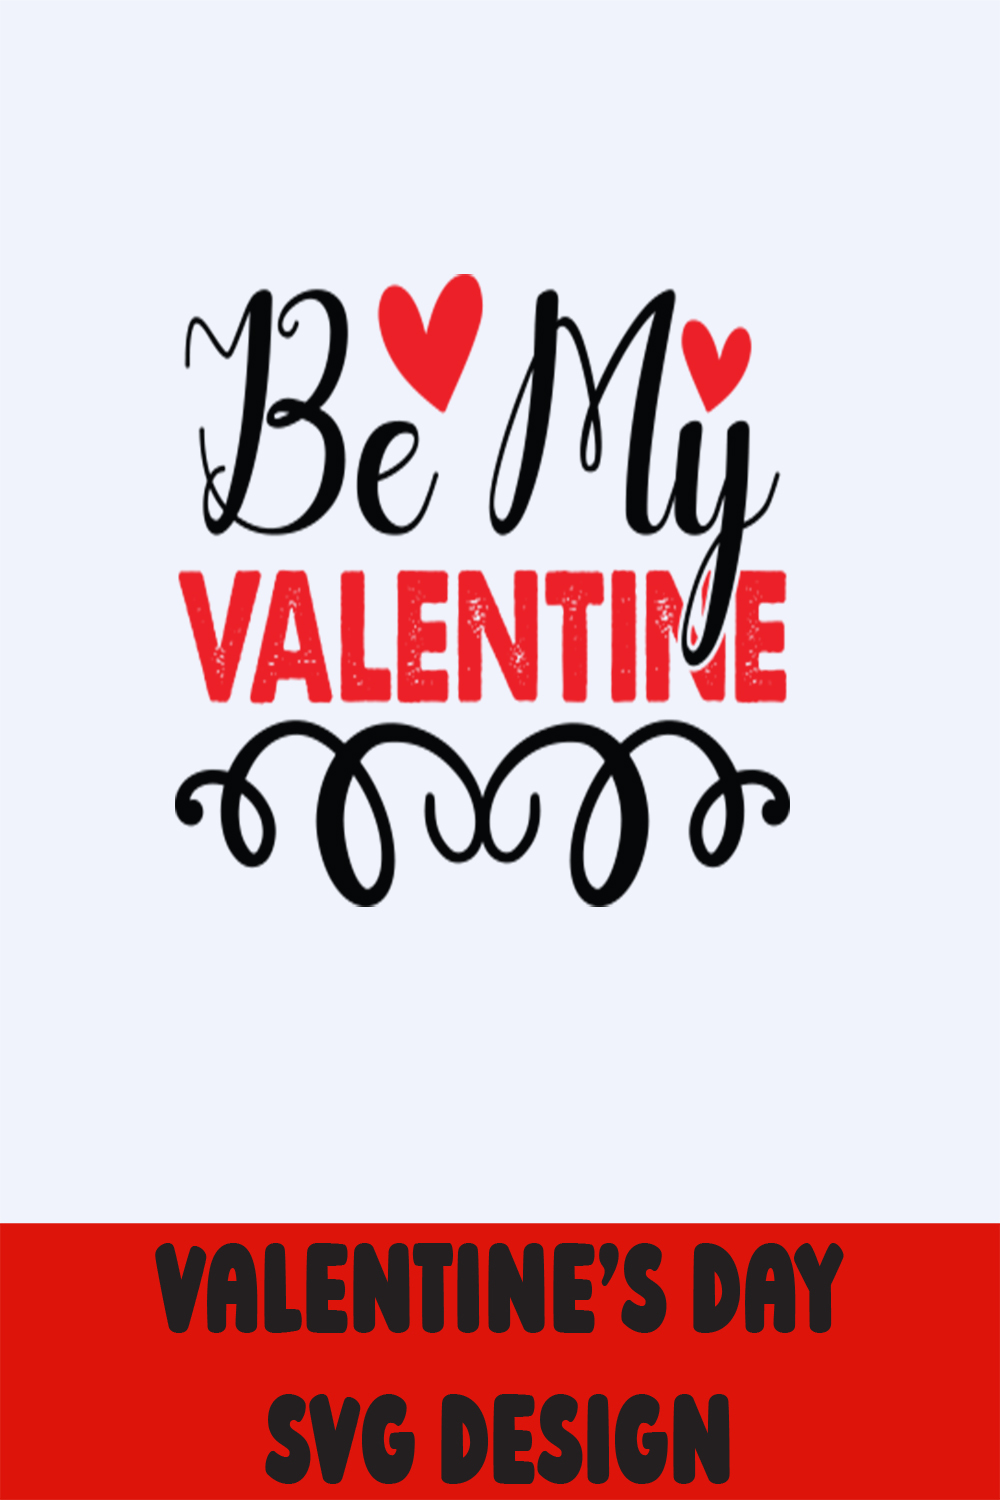 Image with great printable lettering Be My Valentine